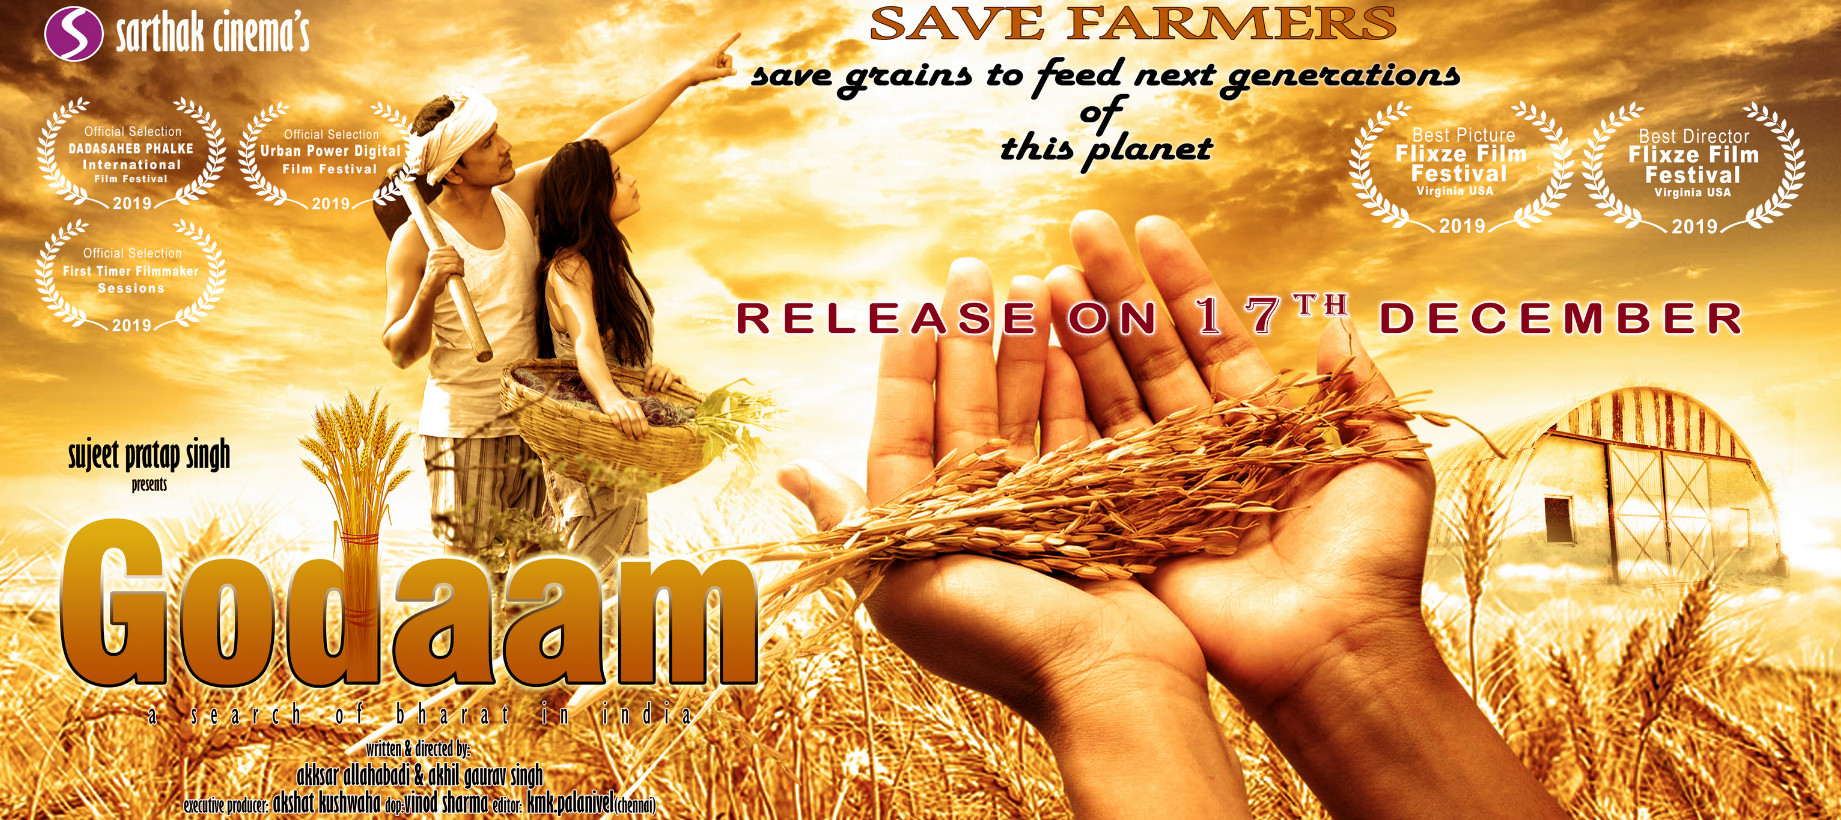 Trailer launch of godaam, the untold stories of indian farmers